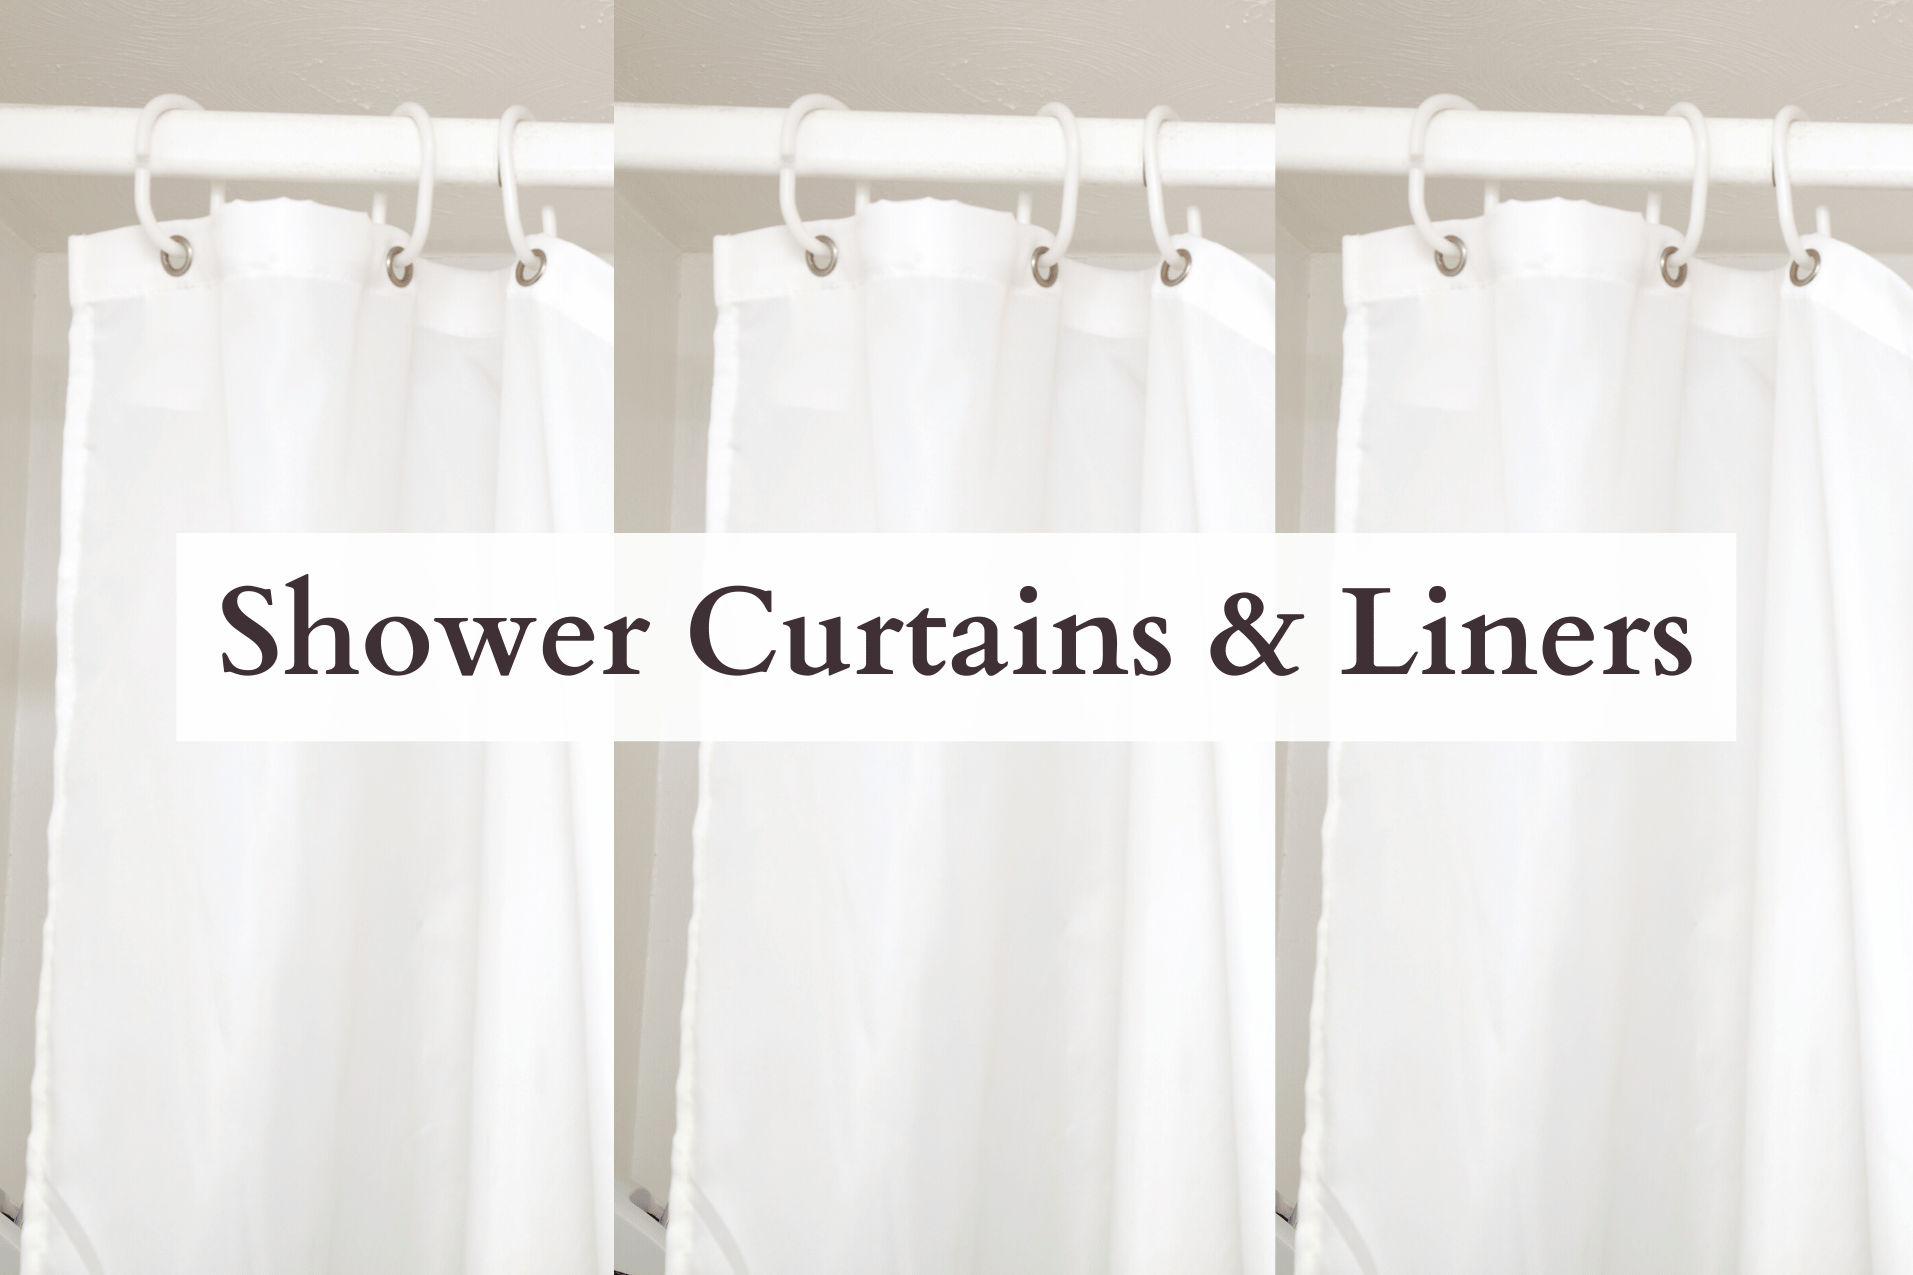 Non-Toxic Shower Curtains and Liners